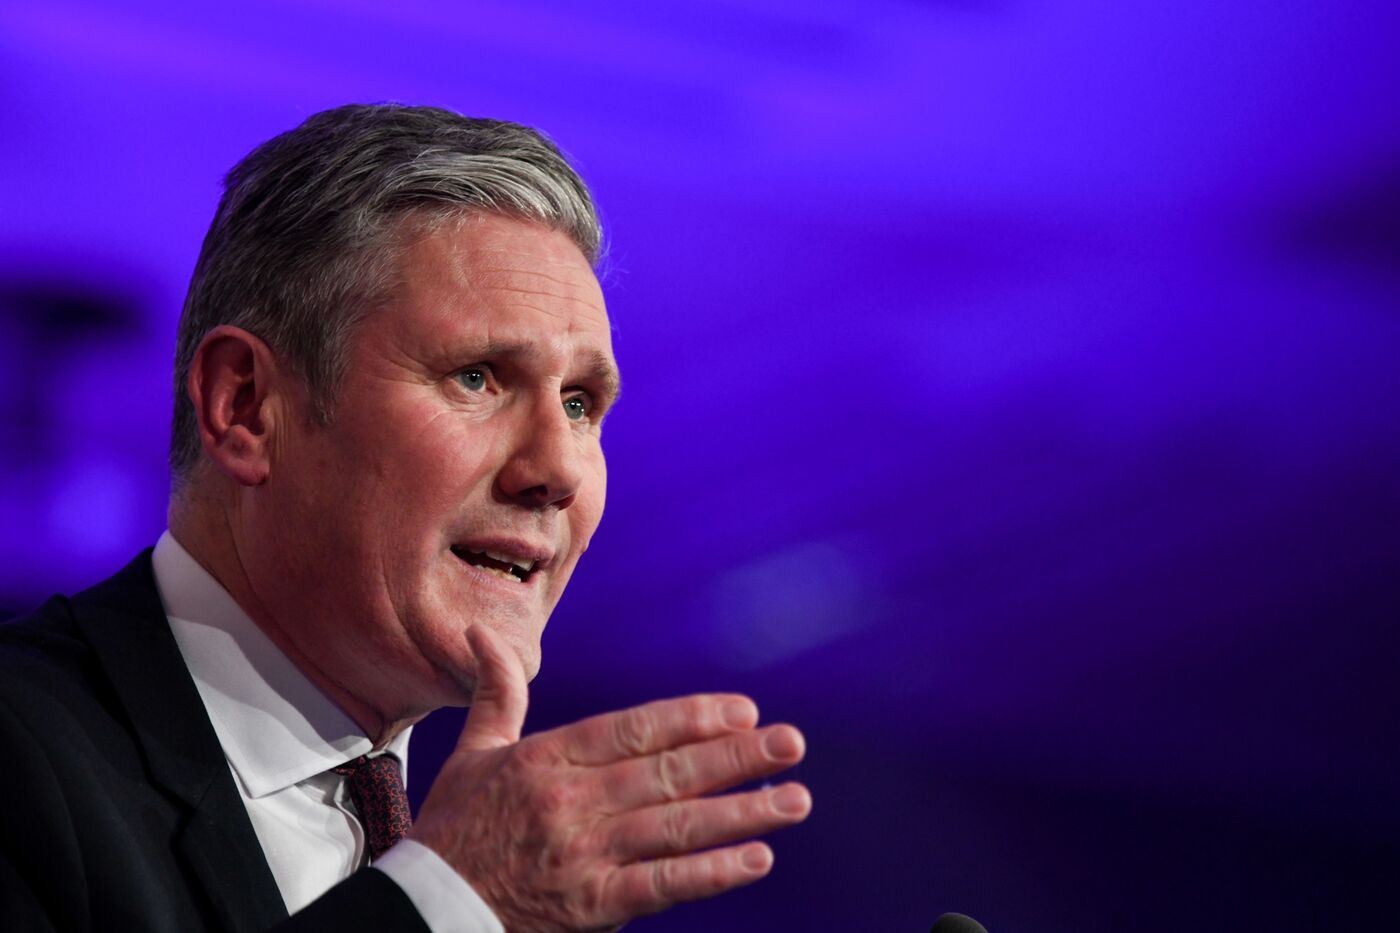 Keir Starmer Vows to Boost UK Steelmaking as He Makes Pitch for Power ...